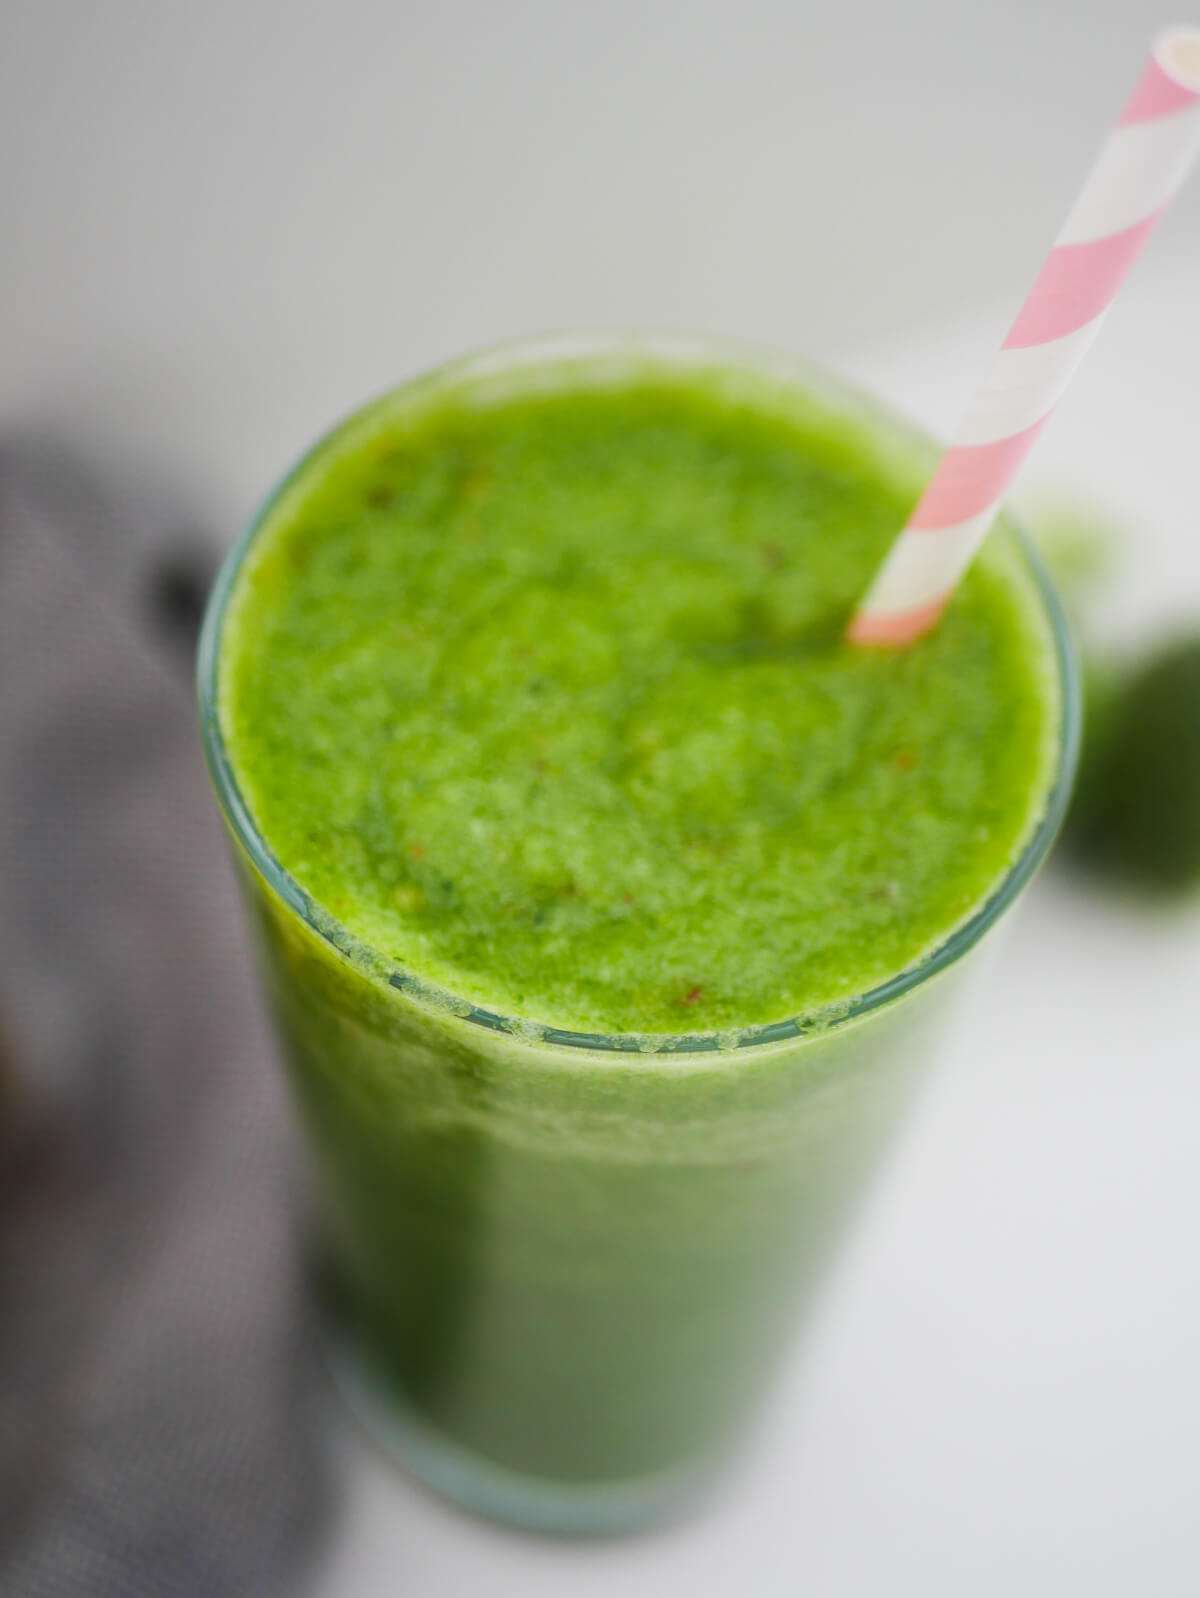 green smoothie in a glass with pink straw